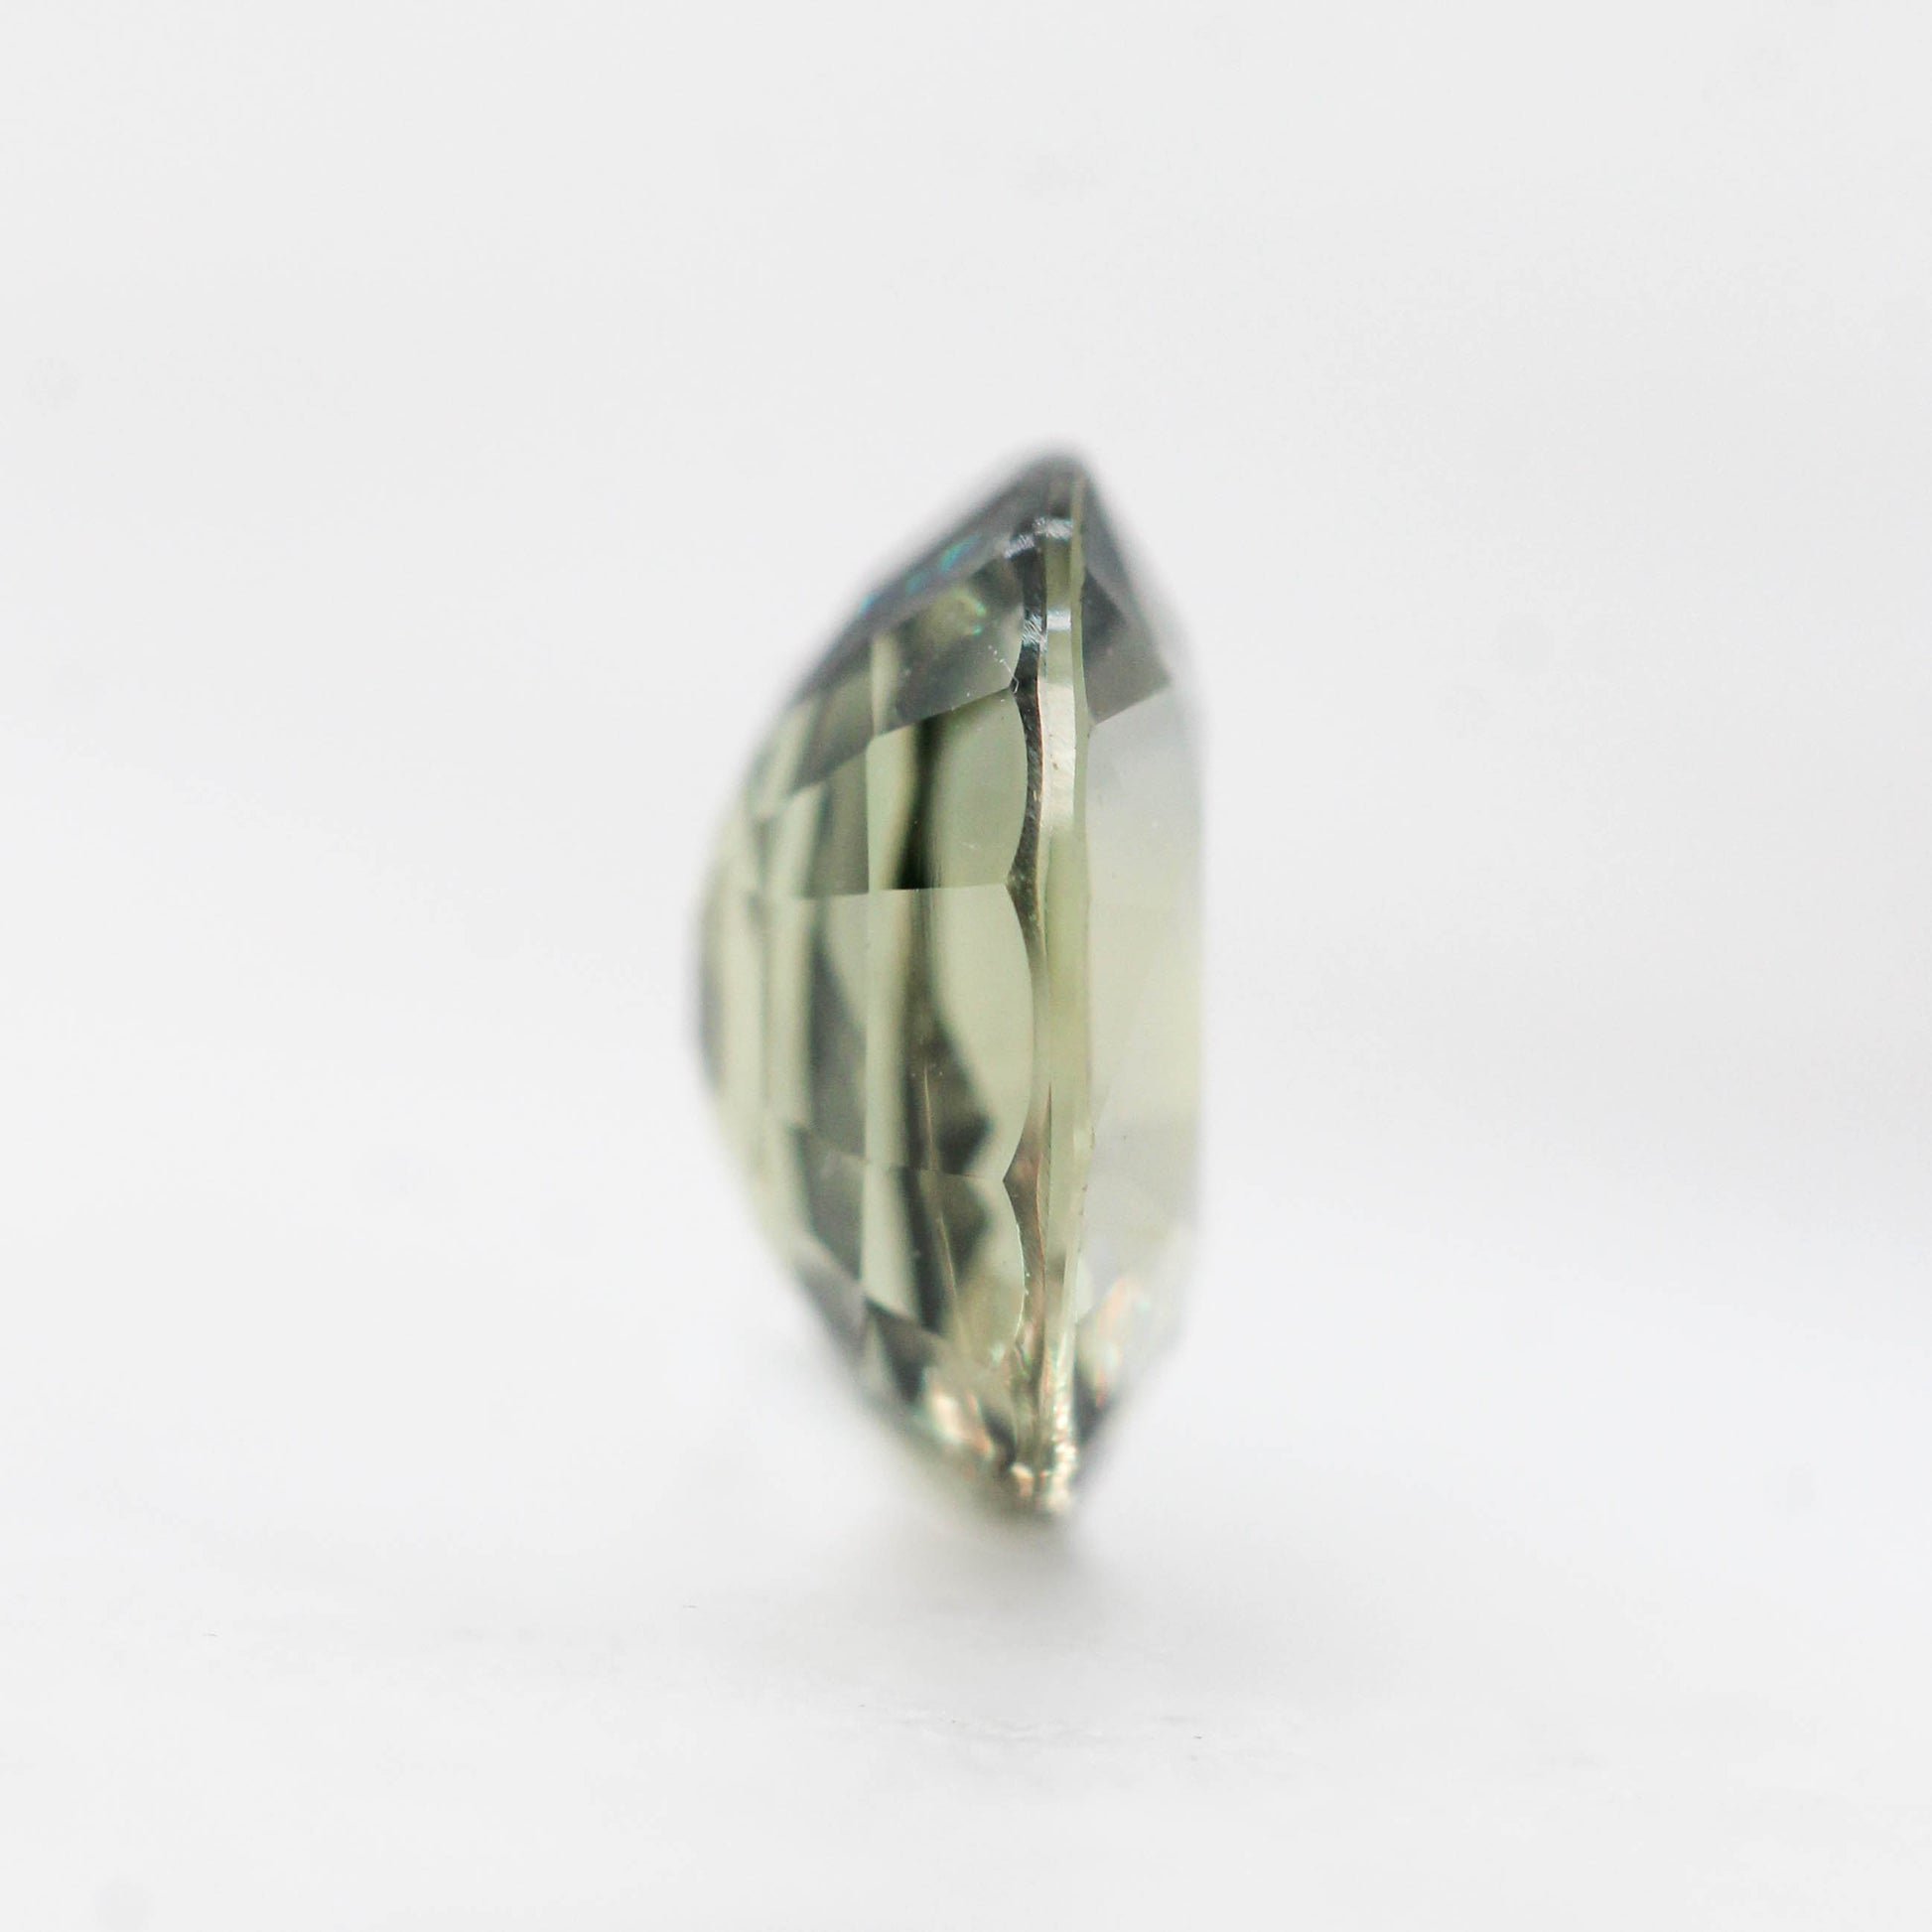 1.16 Carat Olive Green Oval Sapphire for Custom Work - Inventory Code OOS116 - Midwinter Co. Alternative Bridal Rings and Modern Fine Jewelry